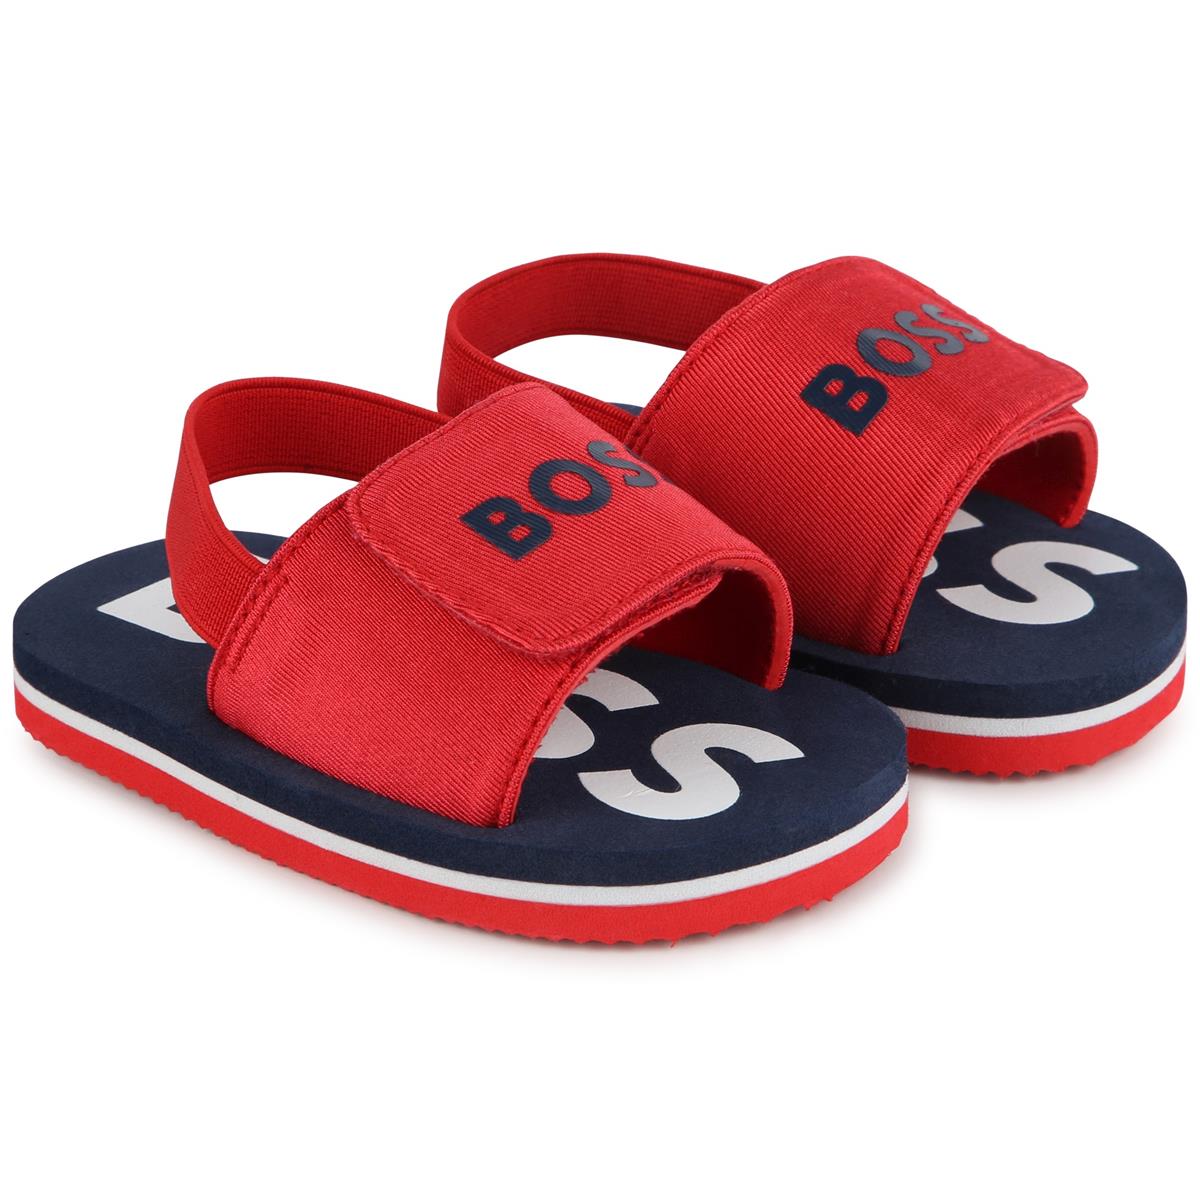 Baby Boys Red Sandals